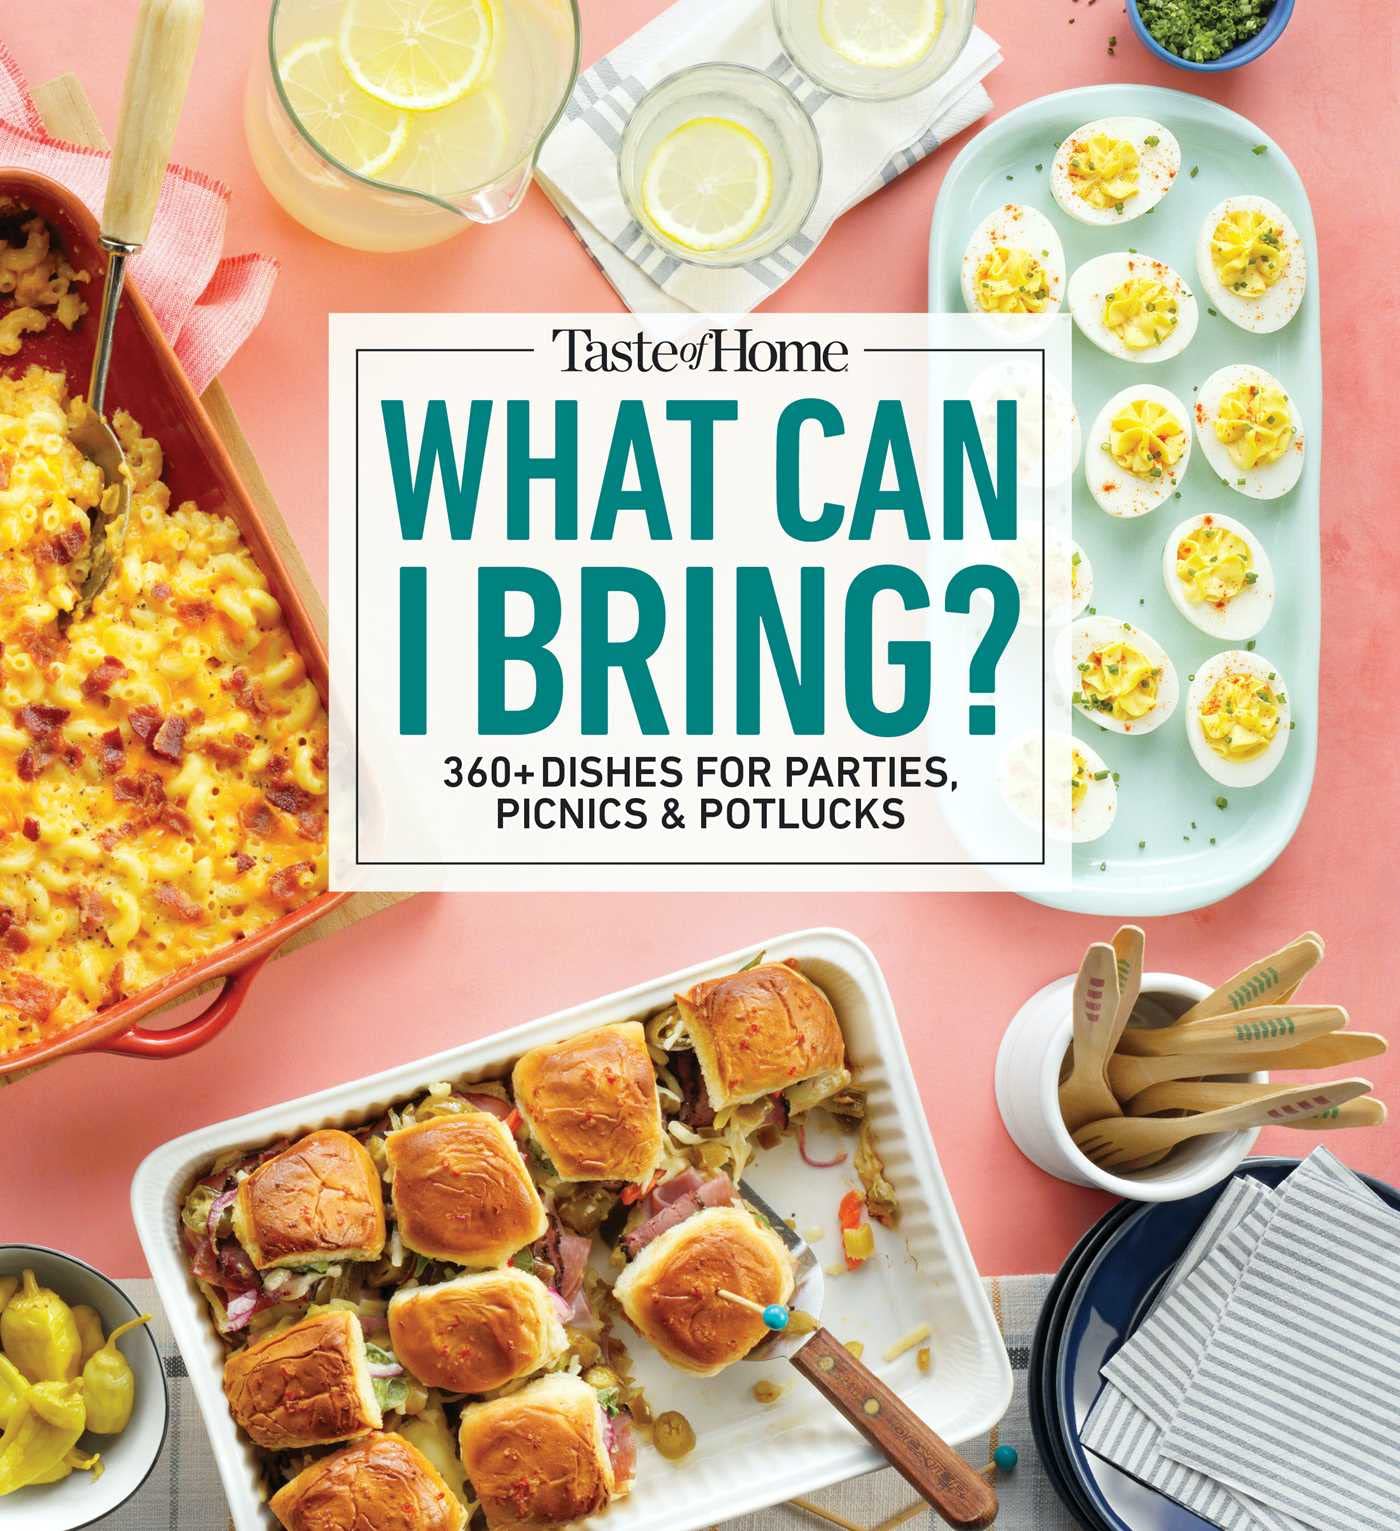 Taste of Home What Can I Bring?: 360+ Dishes for Parties, Picnics & Potlucks by Taste of Home